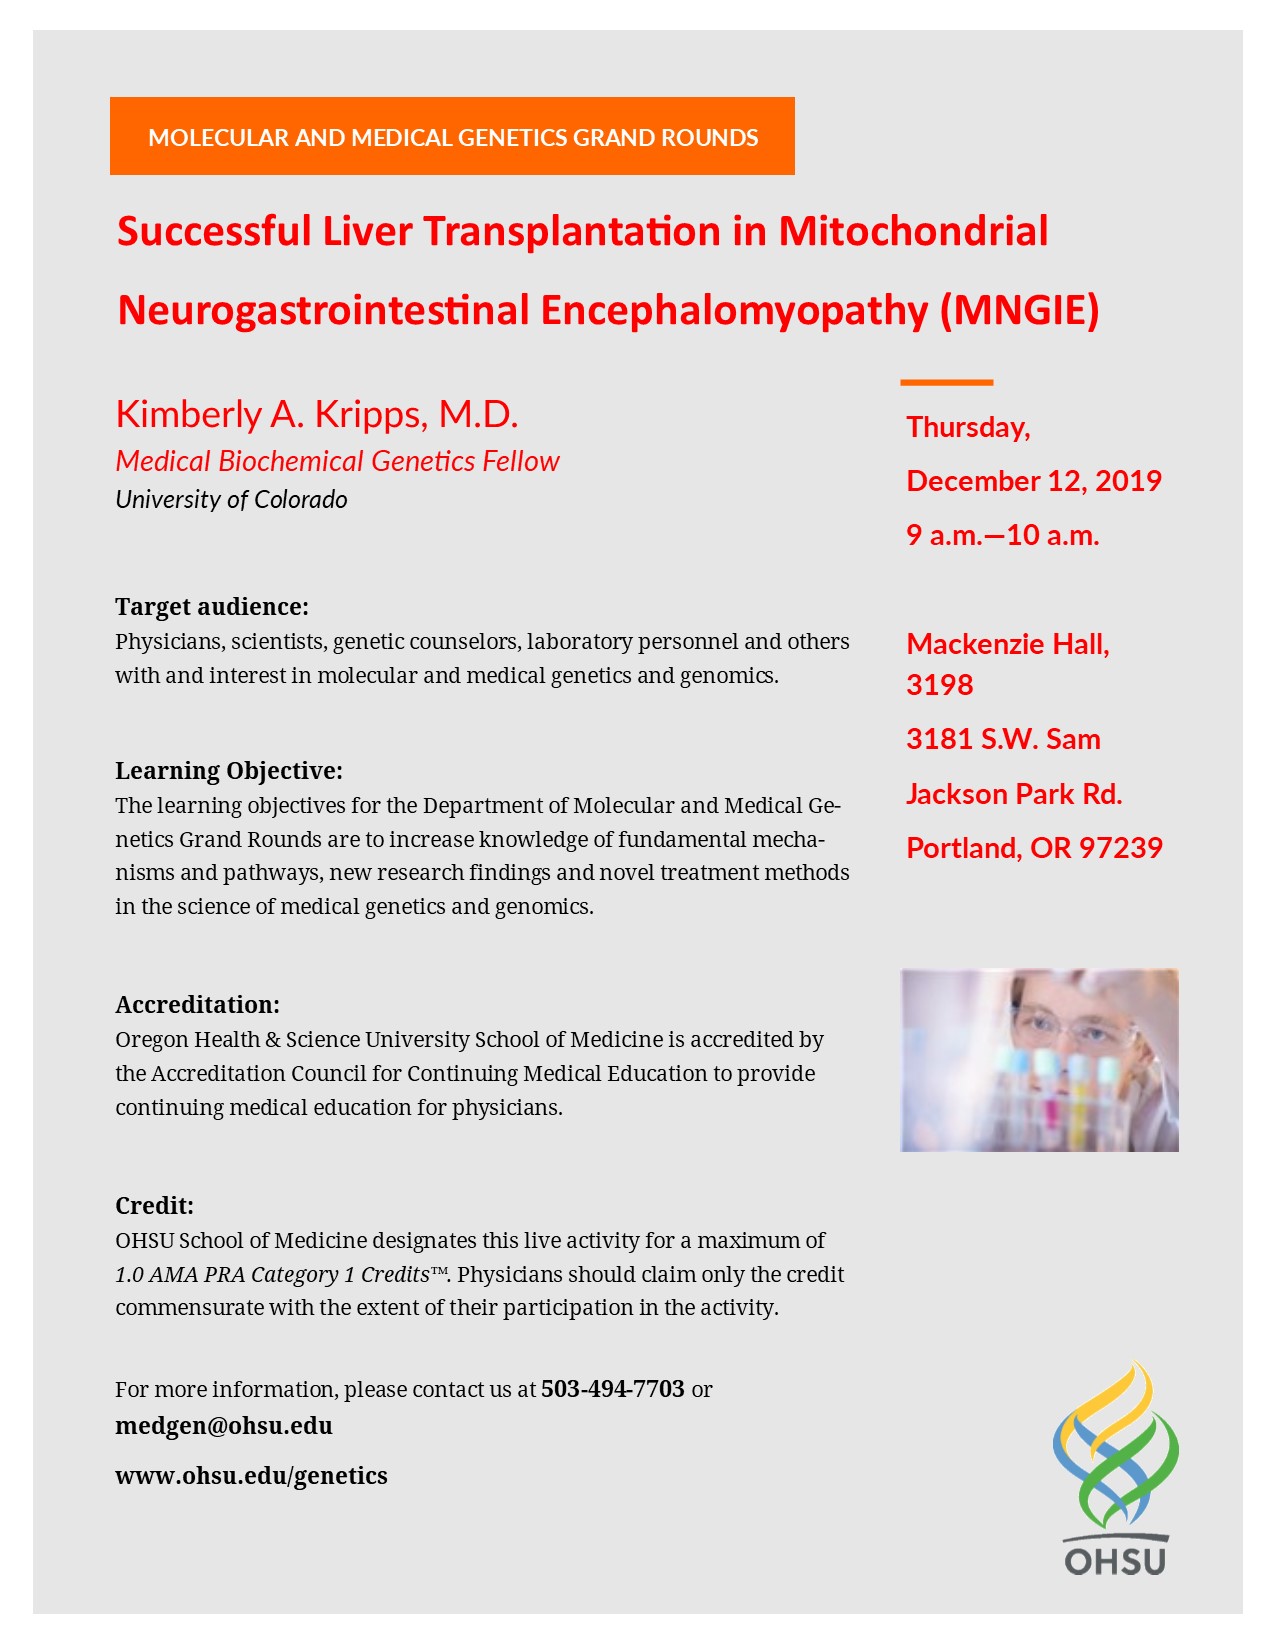 MMG Grand Rounds 12.9.19